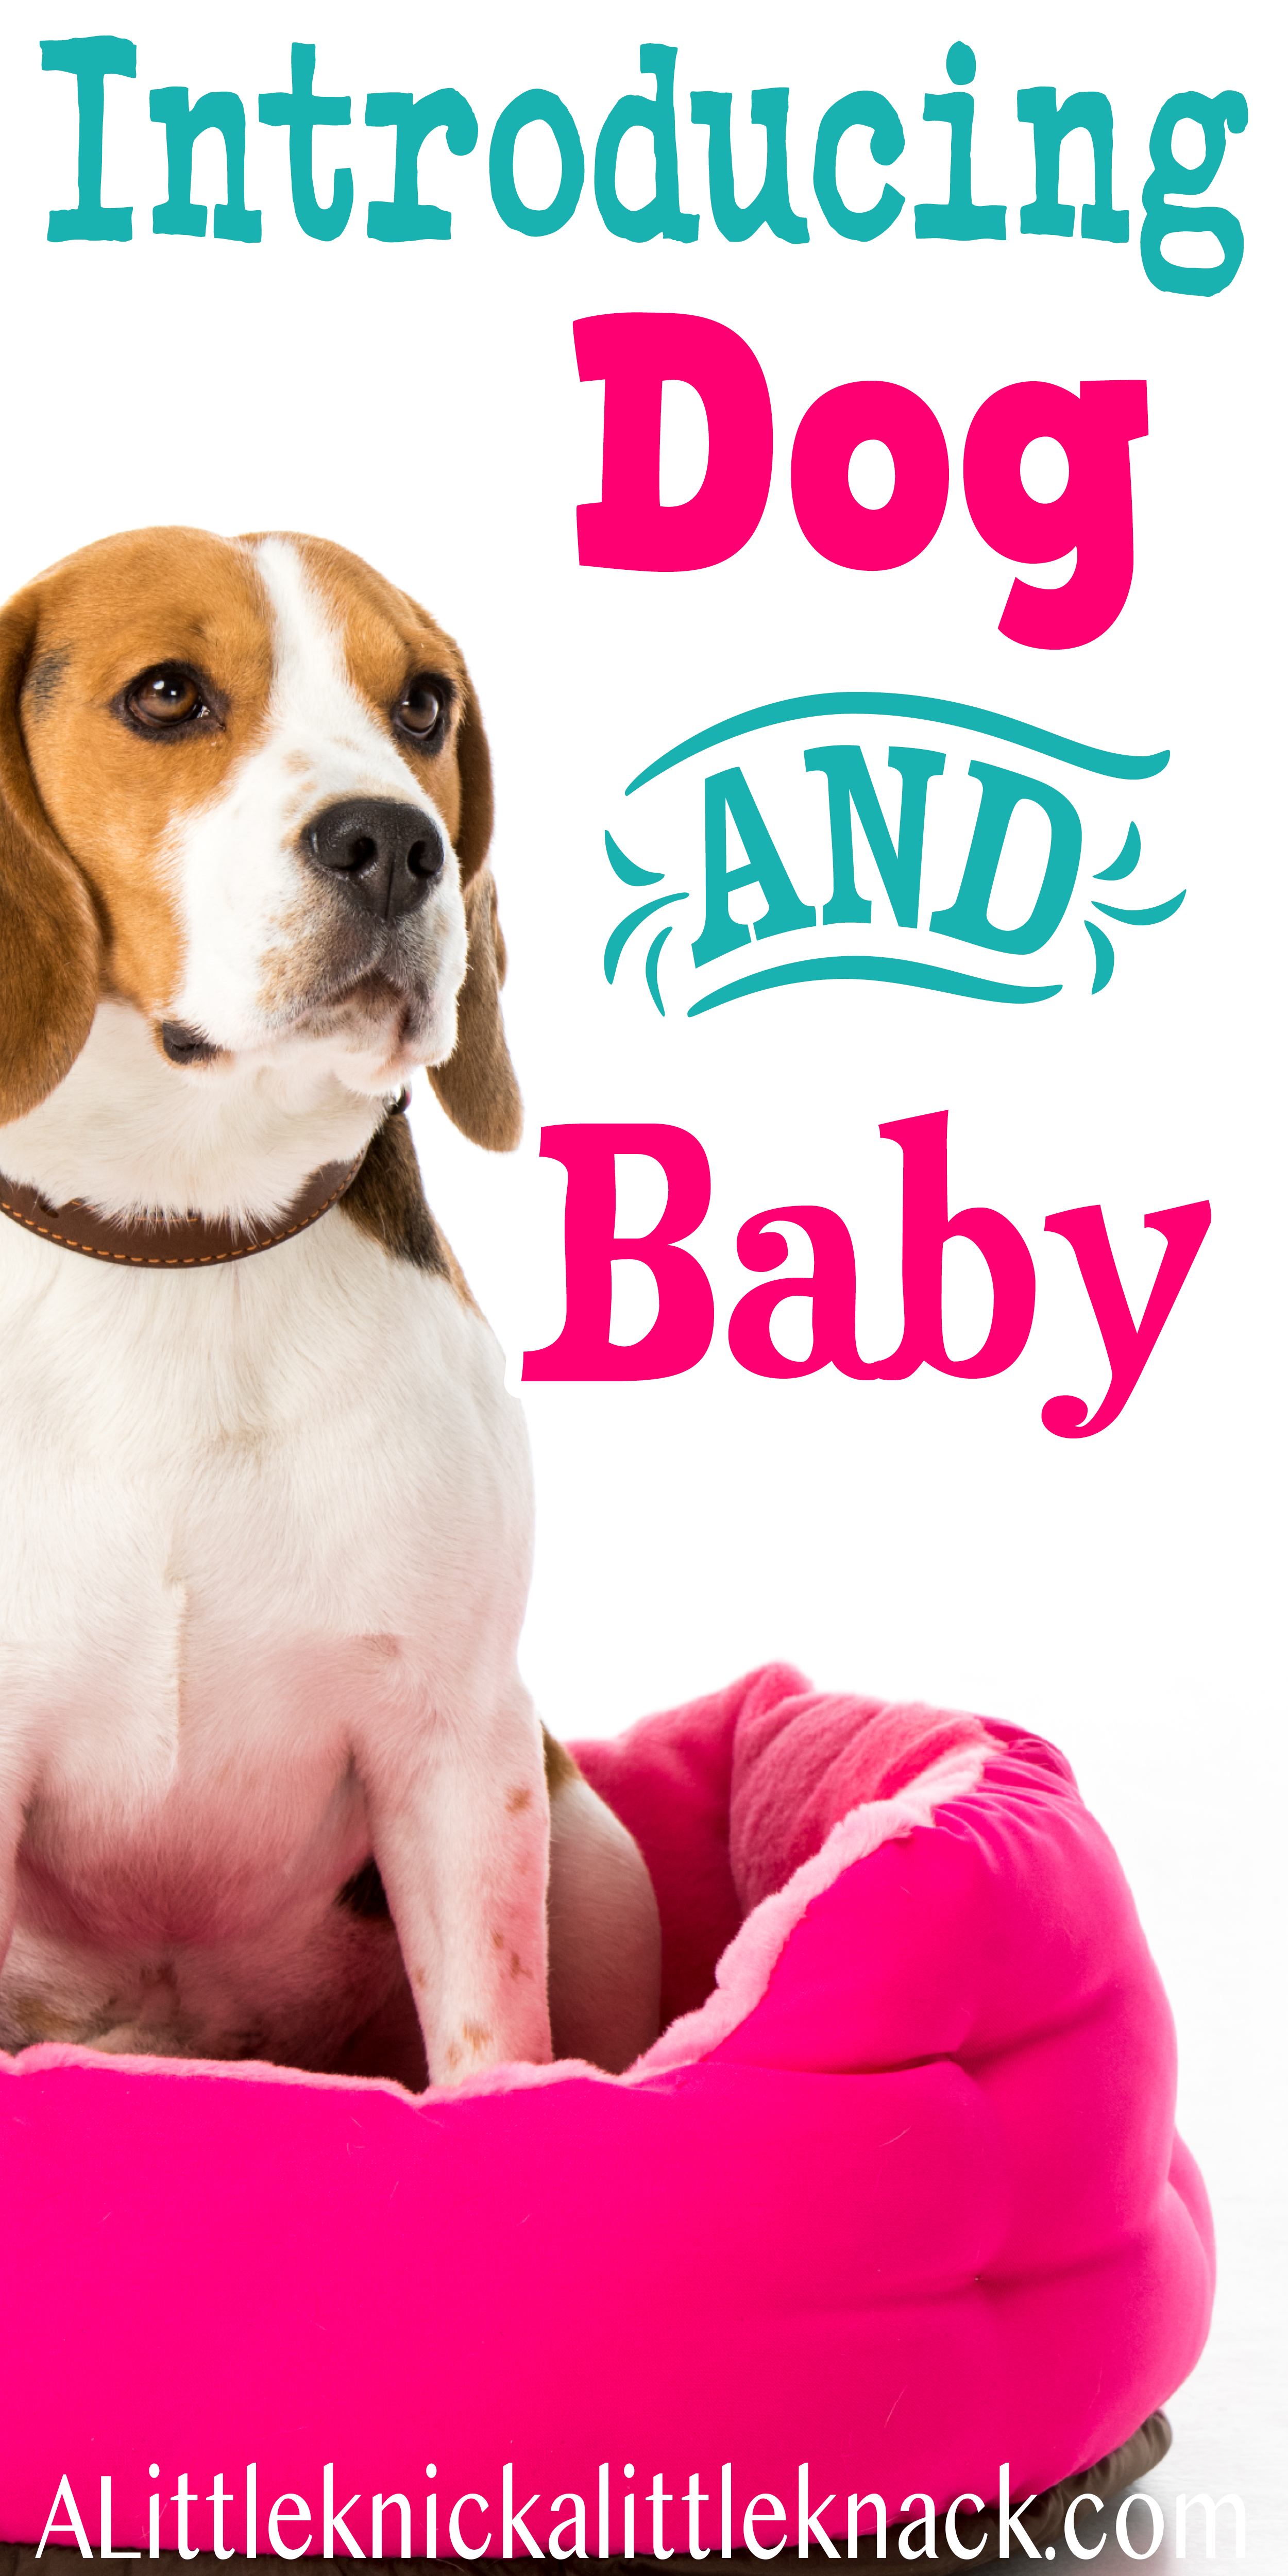 A beagle on a hot pink dog bed with a text overlay